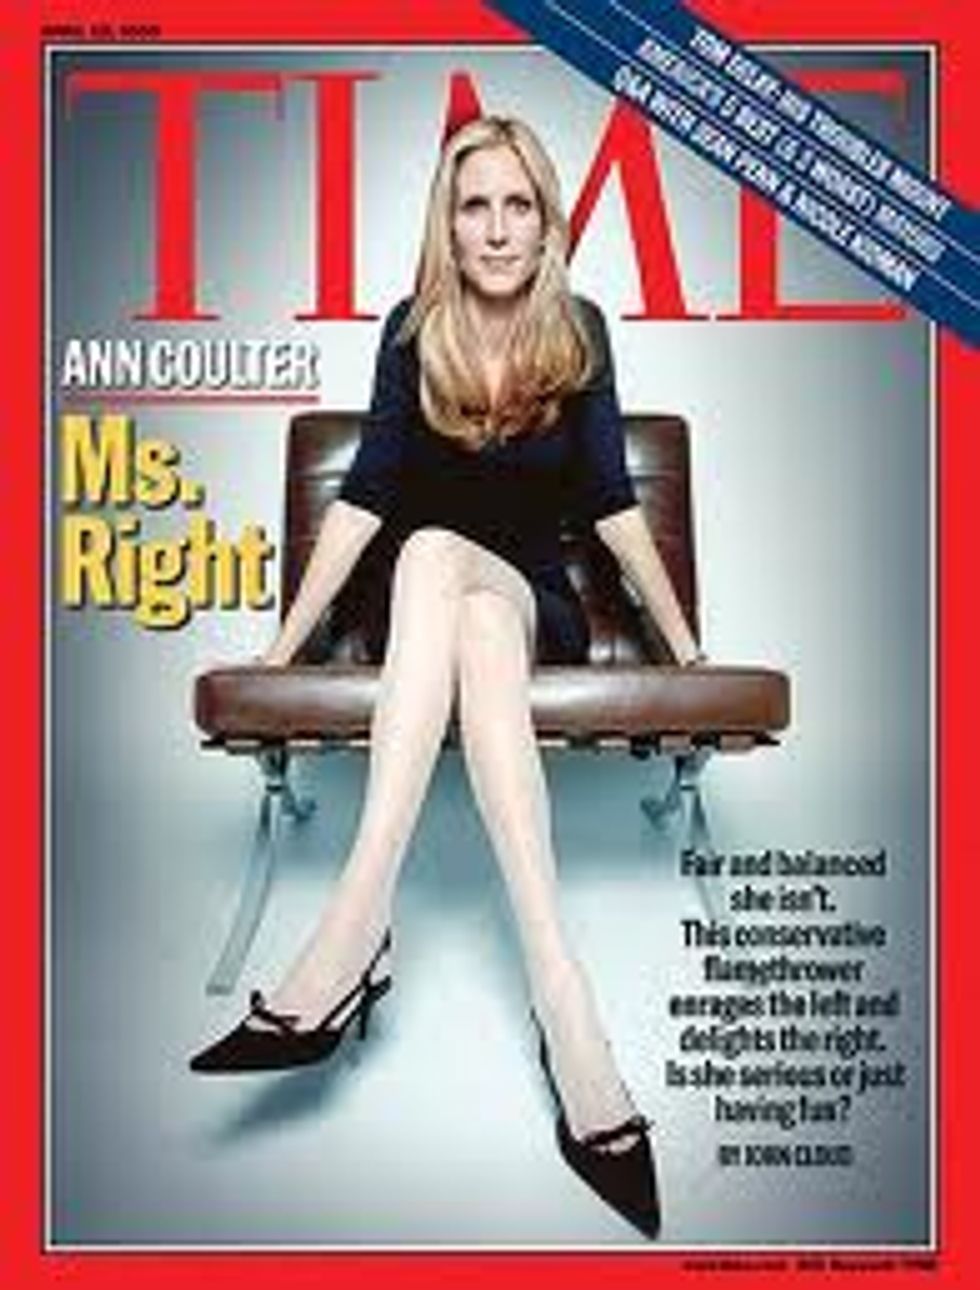 Ann Coulter: Only Ann Coulter Should Exploit GOP Base, Challenges Sarah Palin to Slap-Fight